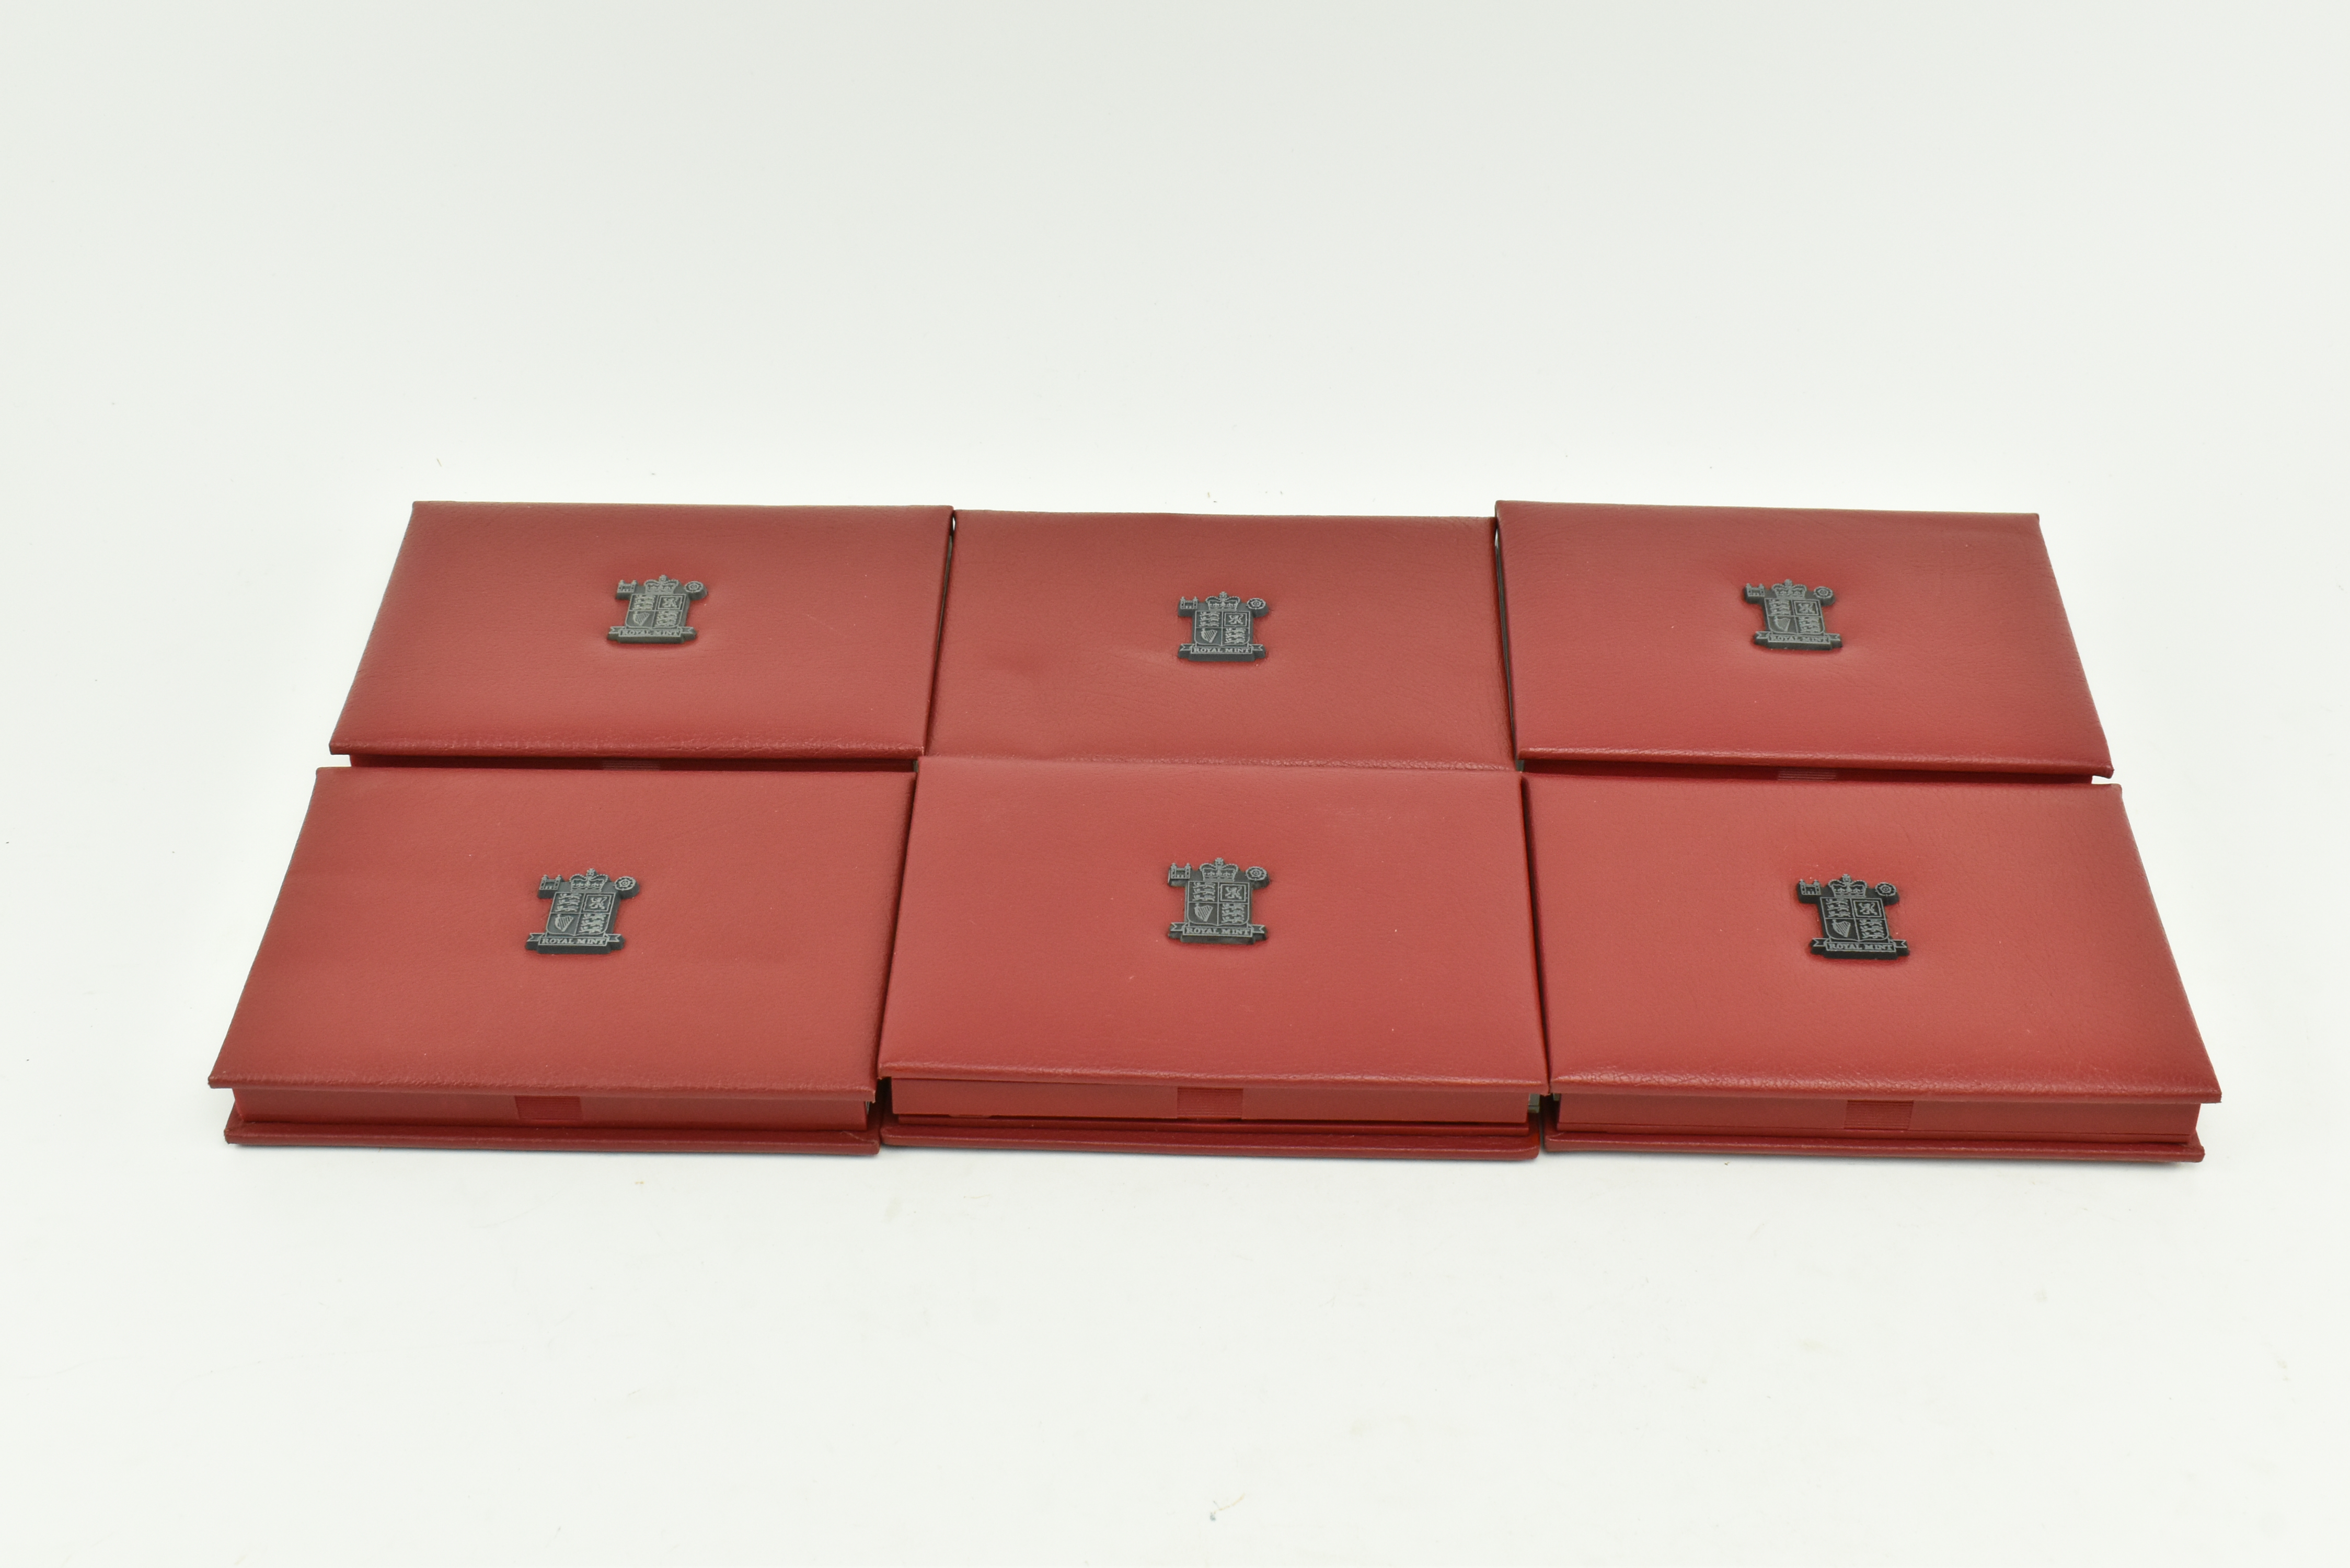 SIX UNITED KINGDOM DELUXE COIN PROOF SETS, 1999-2004 - Image 8 of 8